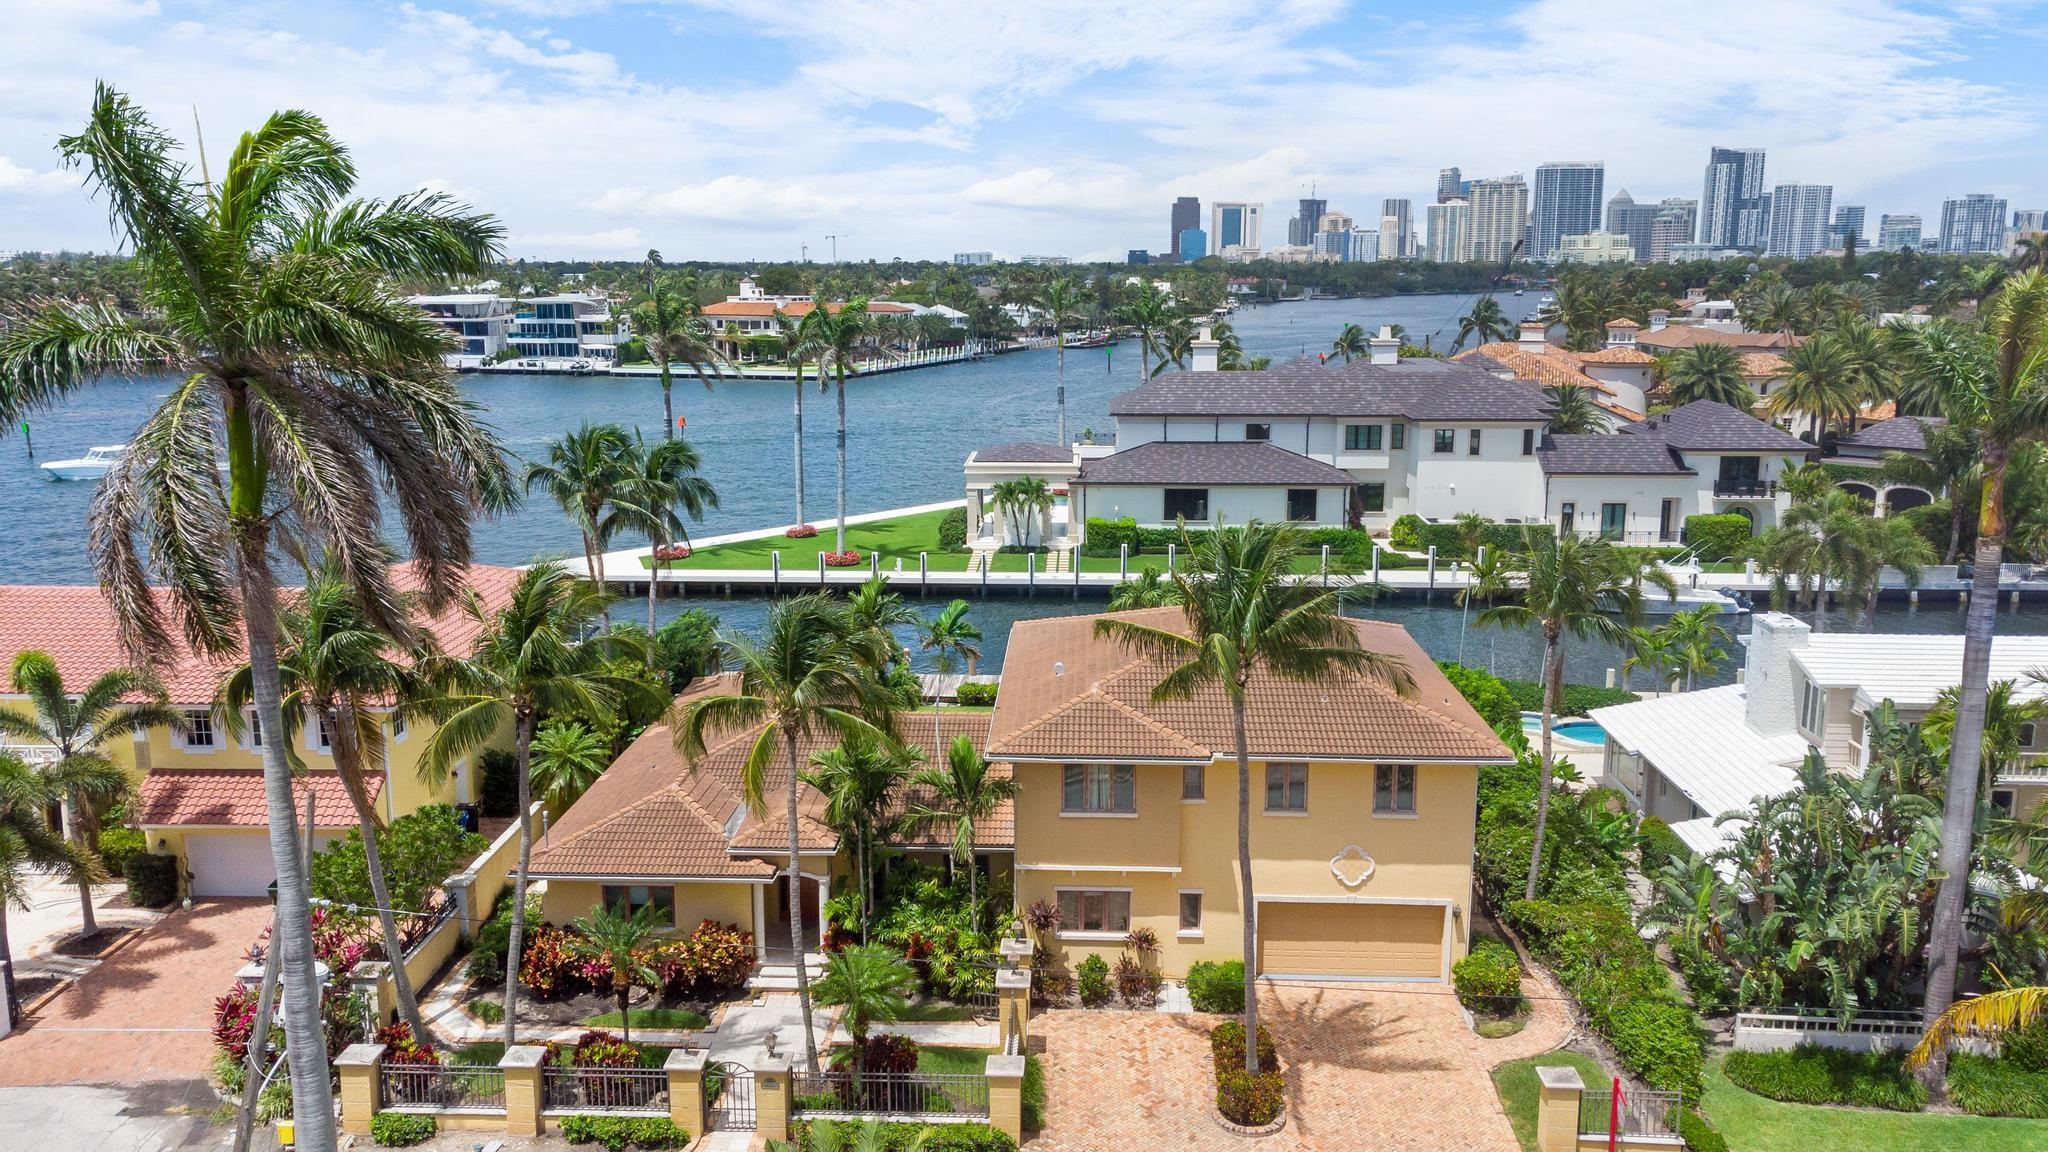 Offered fully furnished and decorated with a beautiful view of the intersection of the Intracoastal and the New River, desirable South Las Olas location. Huge master suite with walk-in closets, his and her bath, walk to the beach & shopping. 100' of dock space. Build your new home and live here through the process.